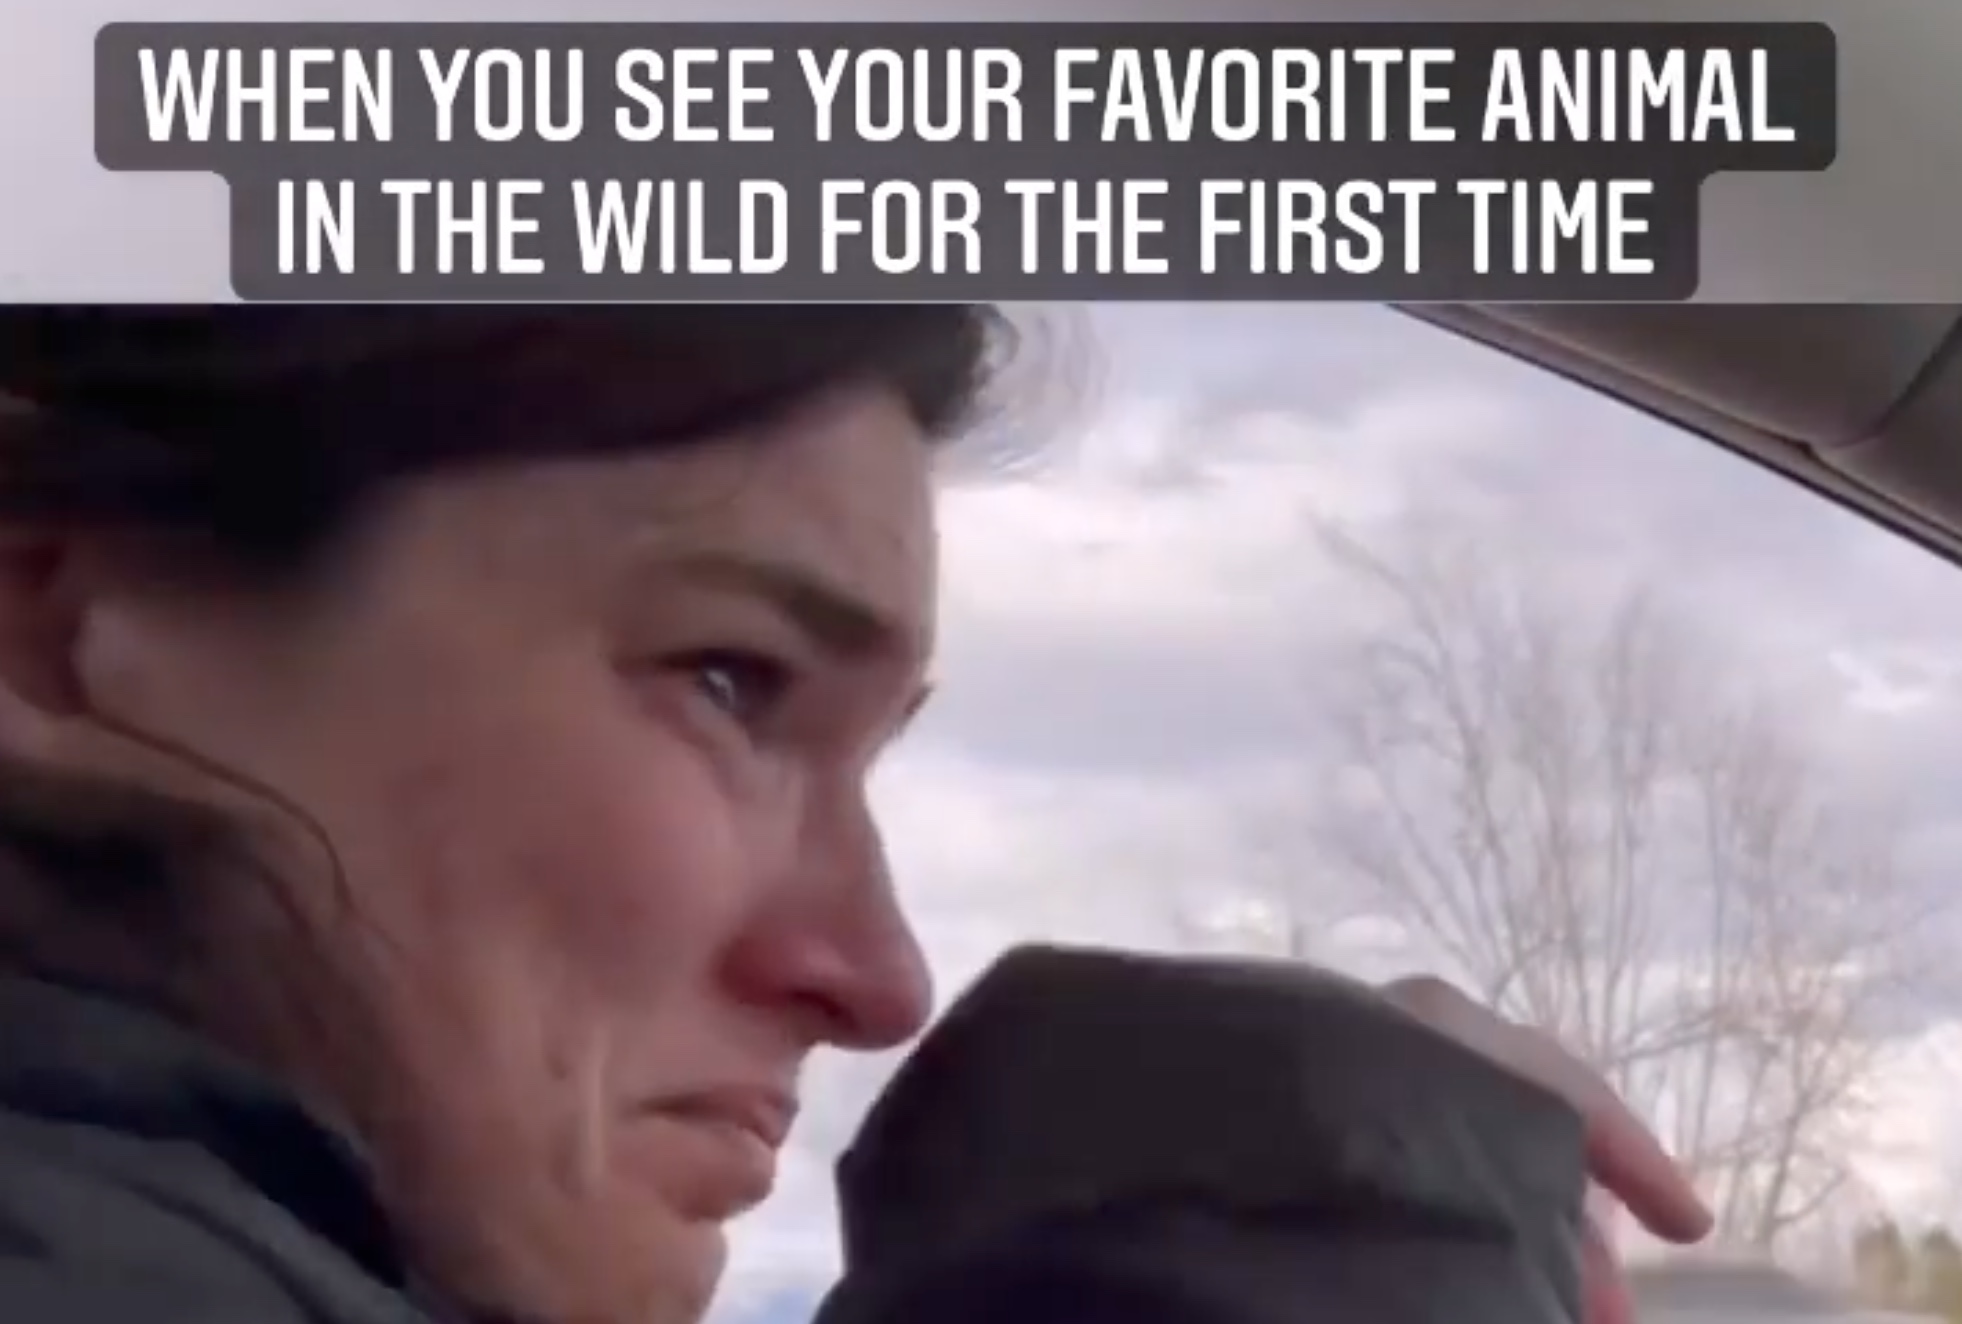 Woman Brought To Tears At First Moose Sighting in Grand Teton National Park